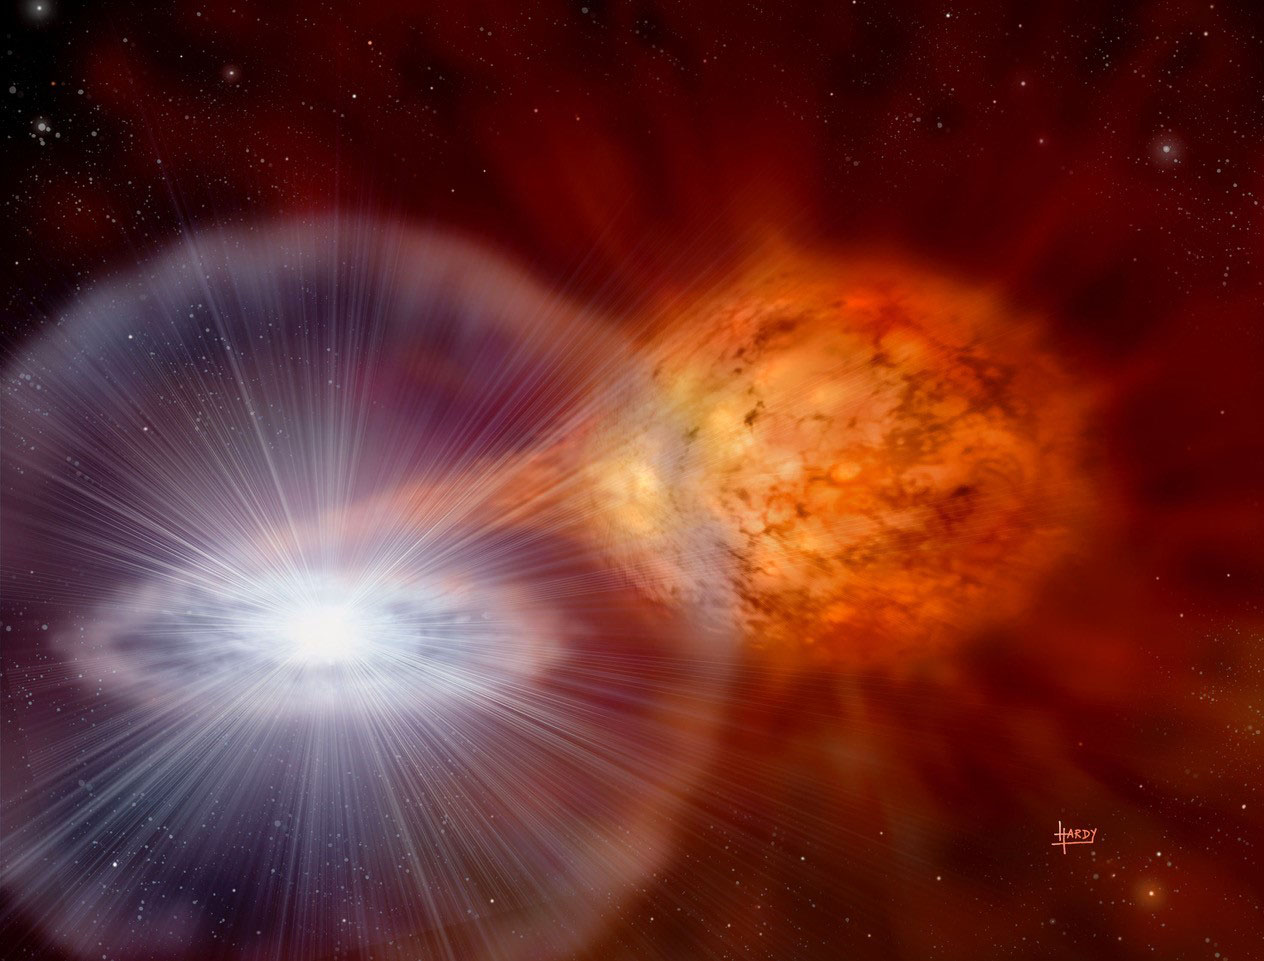 Artist’s interpretation of the explosion of a recurrent nova, RS Ophiuchi. This is a binary star in the constellation of Ophiuchus and is approximately 5,000 light-years away. It explodes roughly every 20 years when the gas flowing from the large star that falls onto the white dwarf reaches temperatures exceeding ten million degrees.